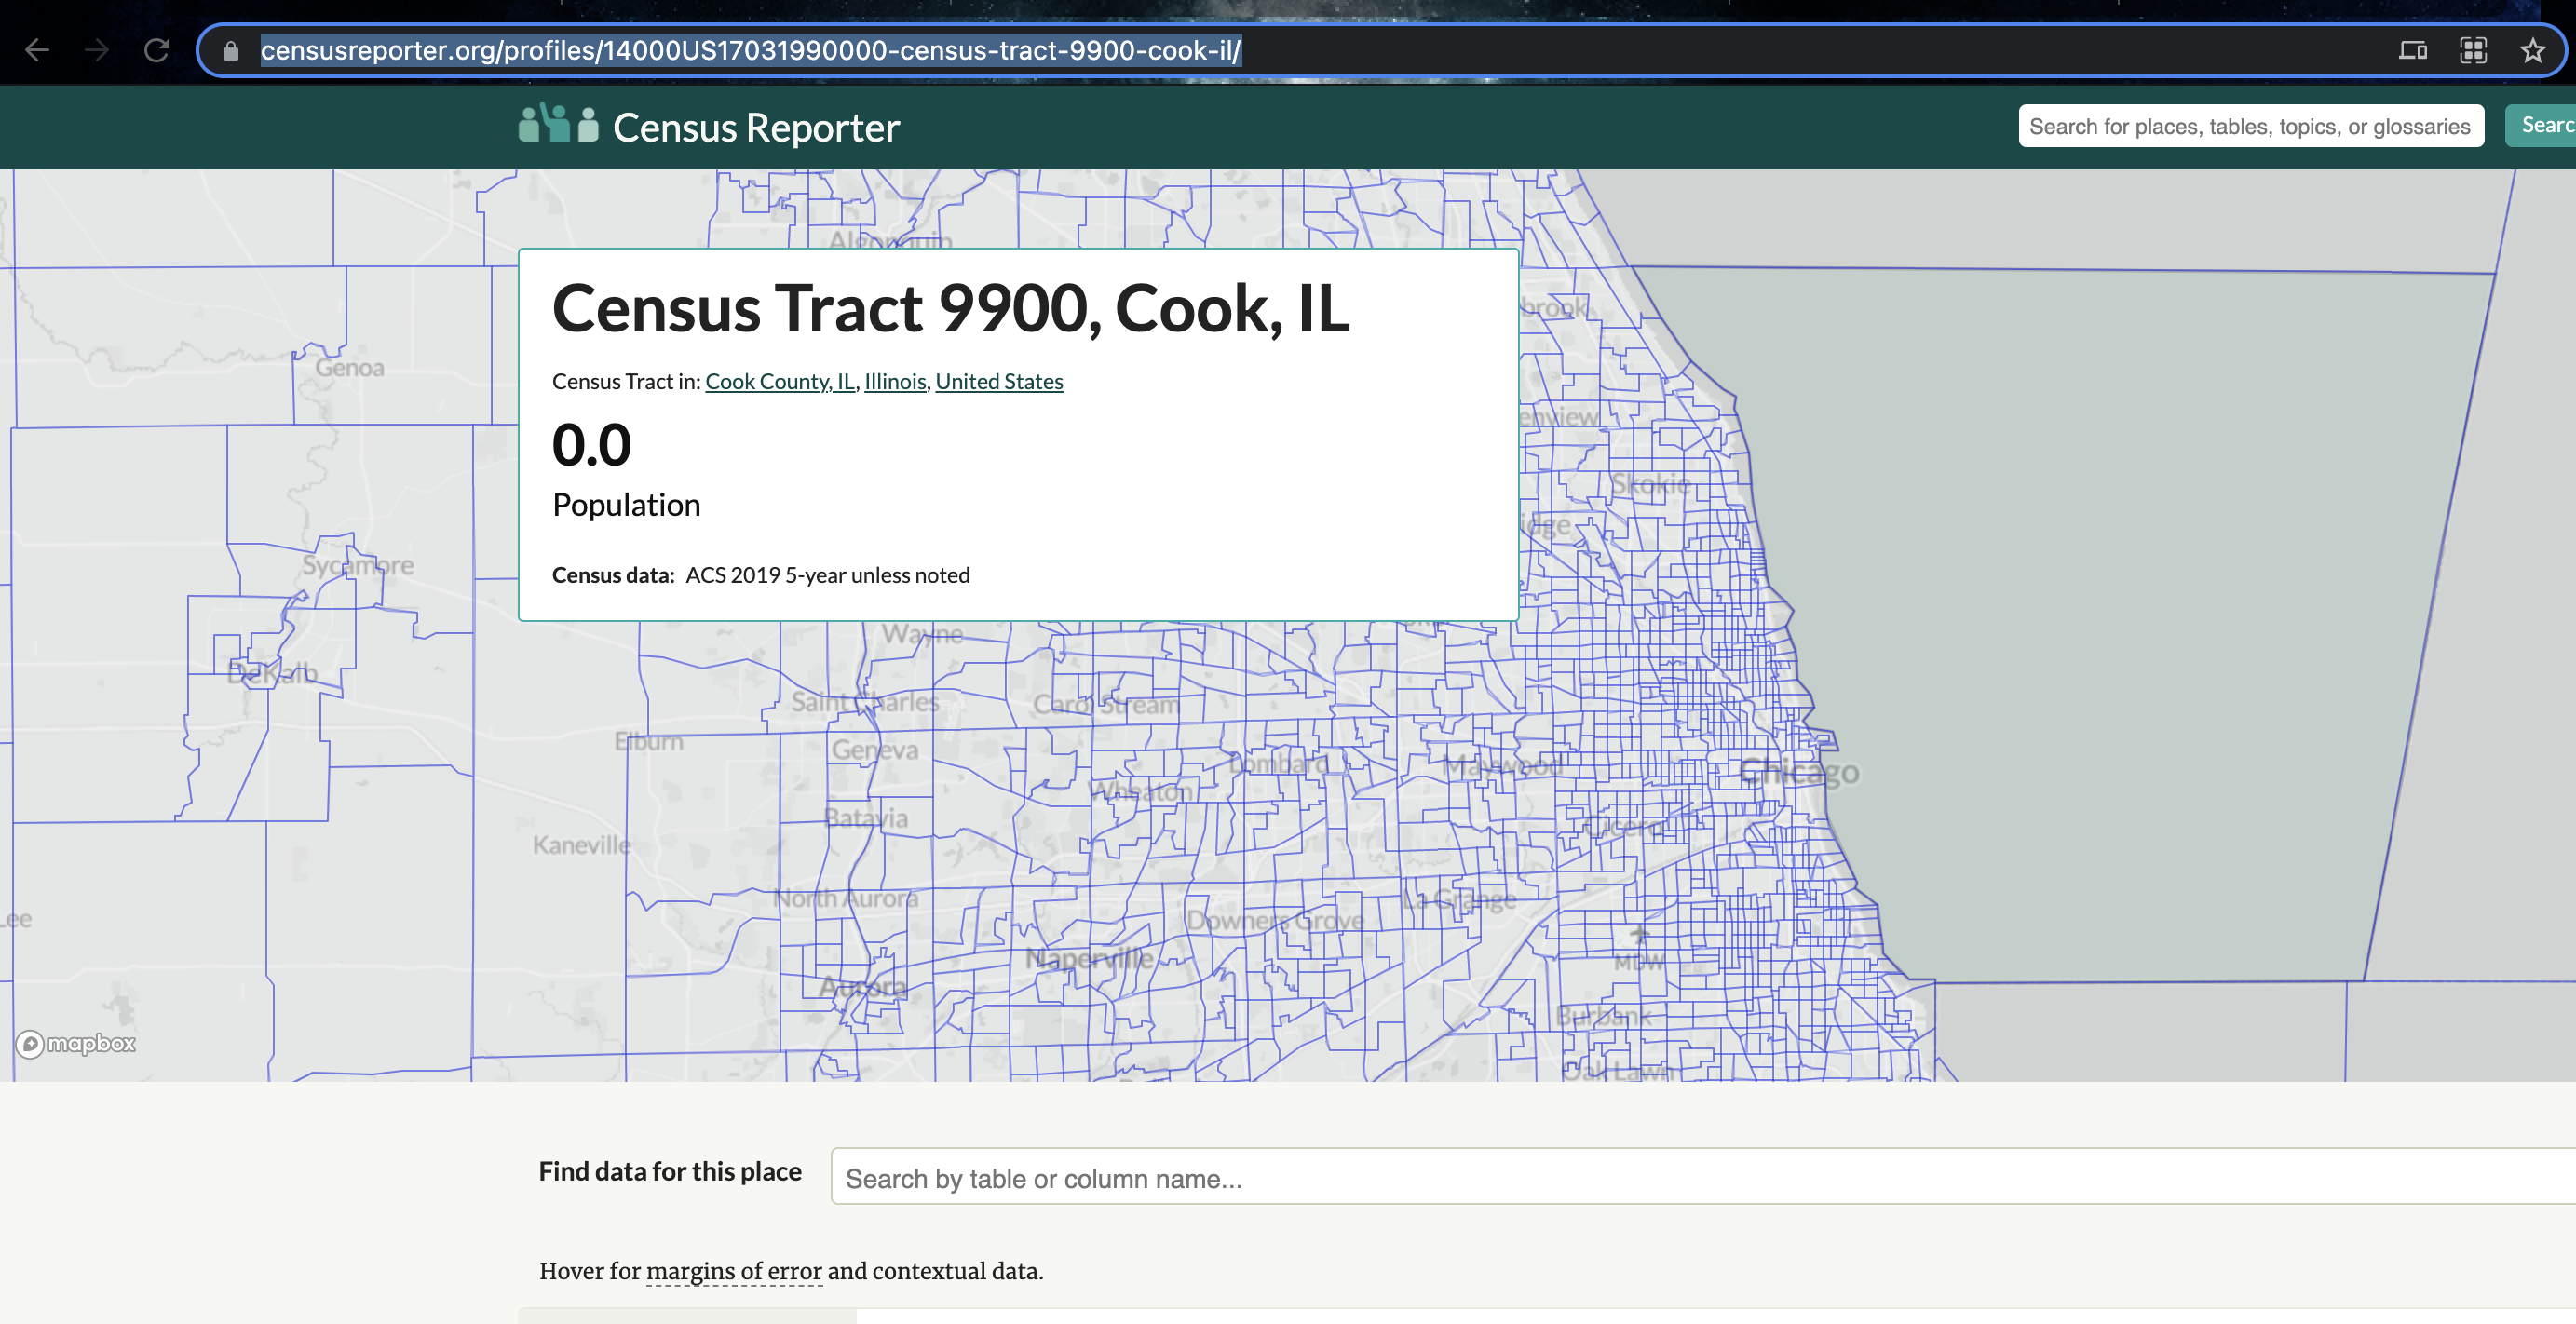 *https://censusreporter.org/profiles/14000US17031990000-census-tract-9900-cook-il/*